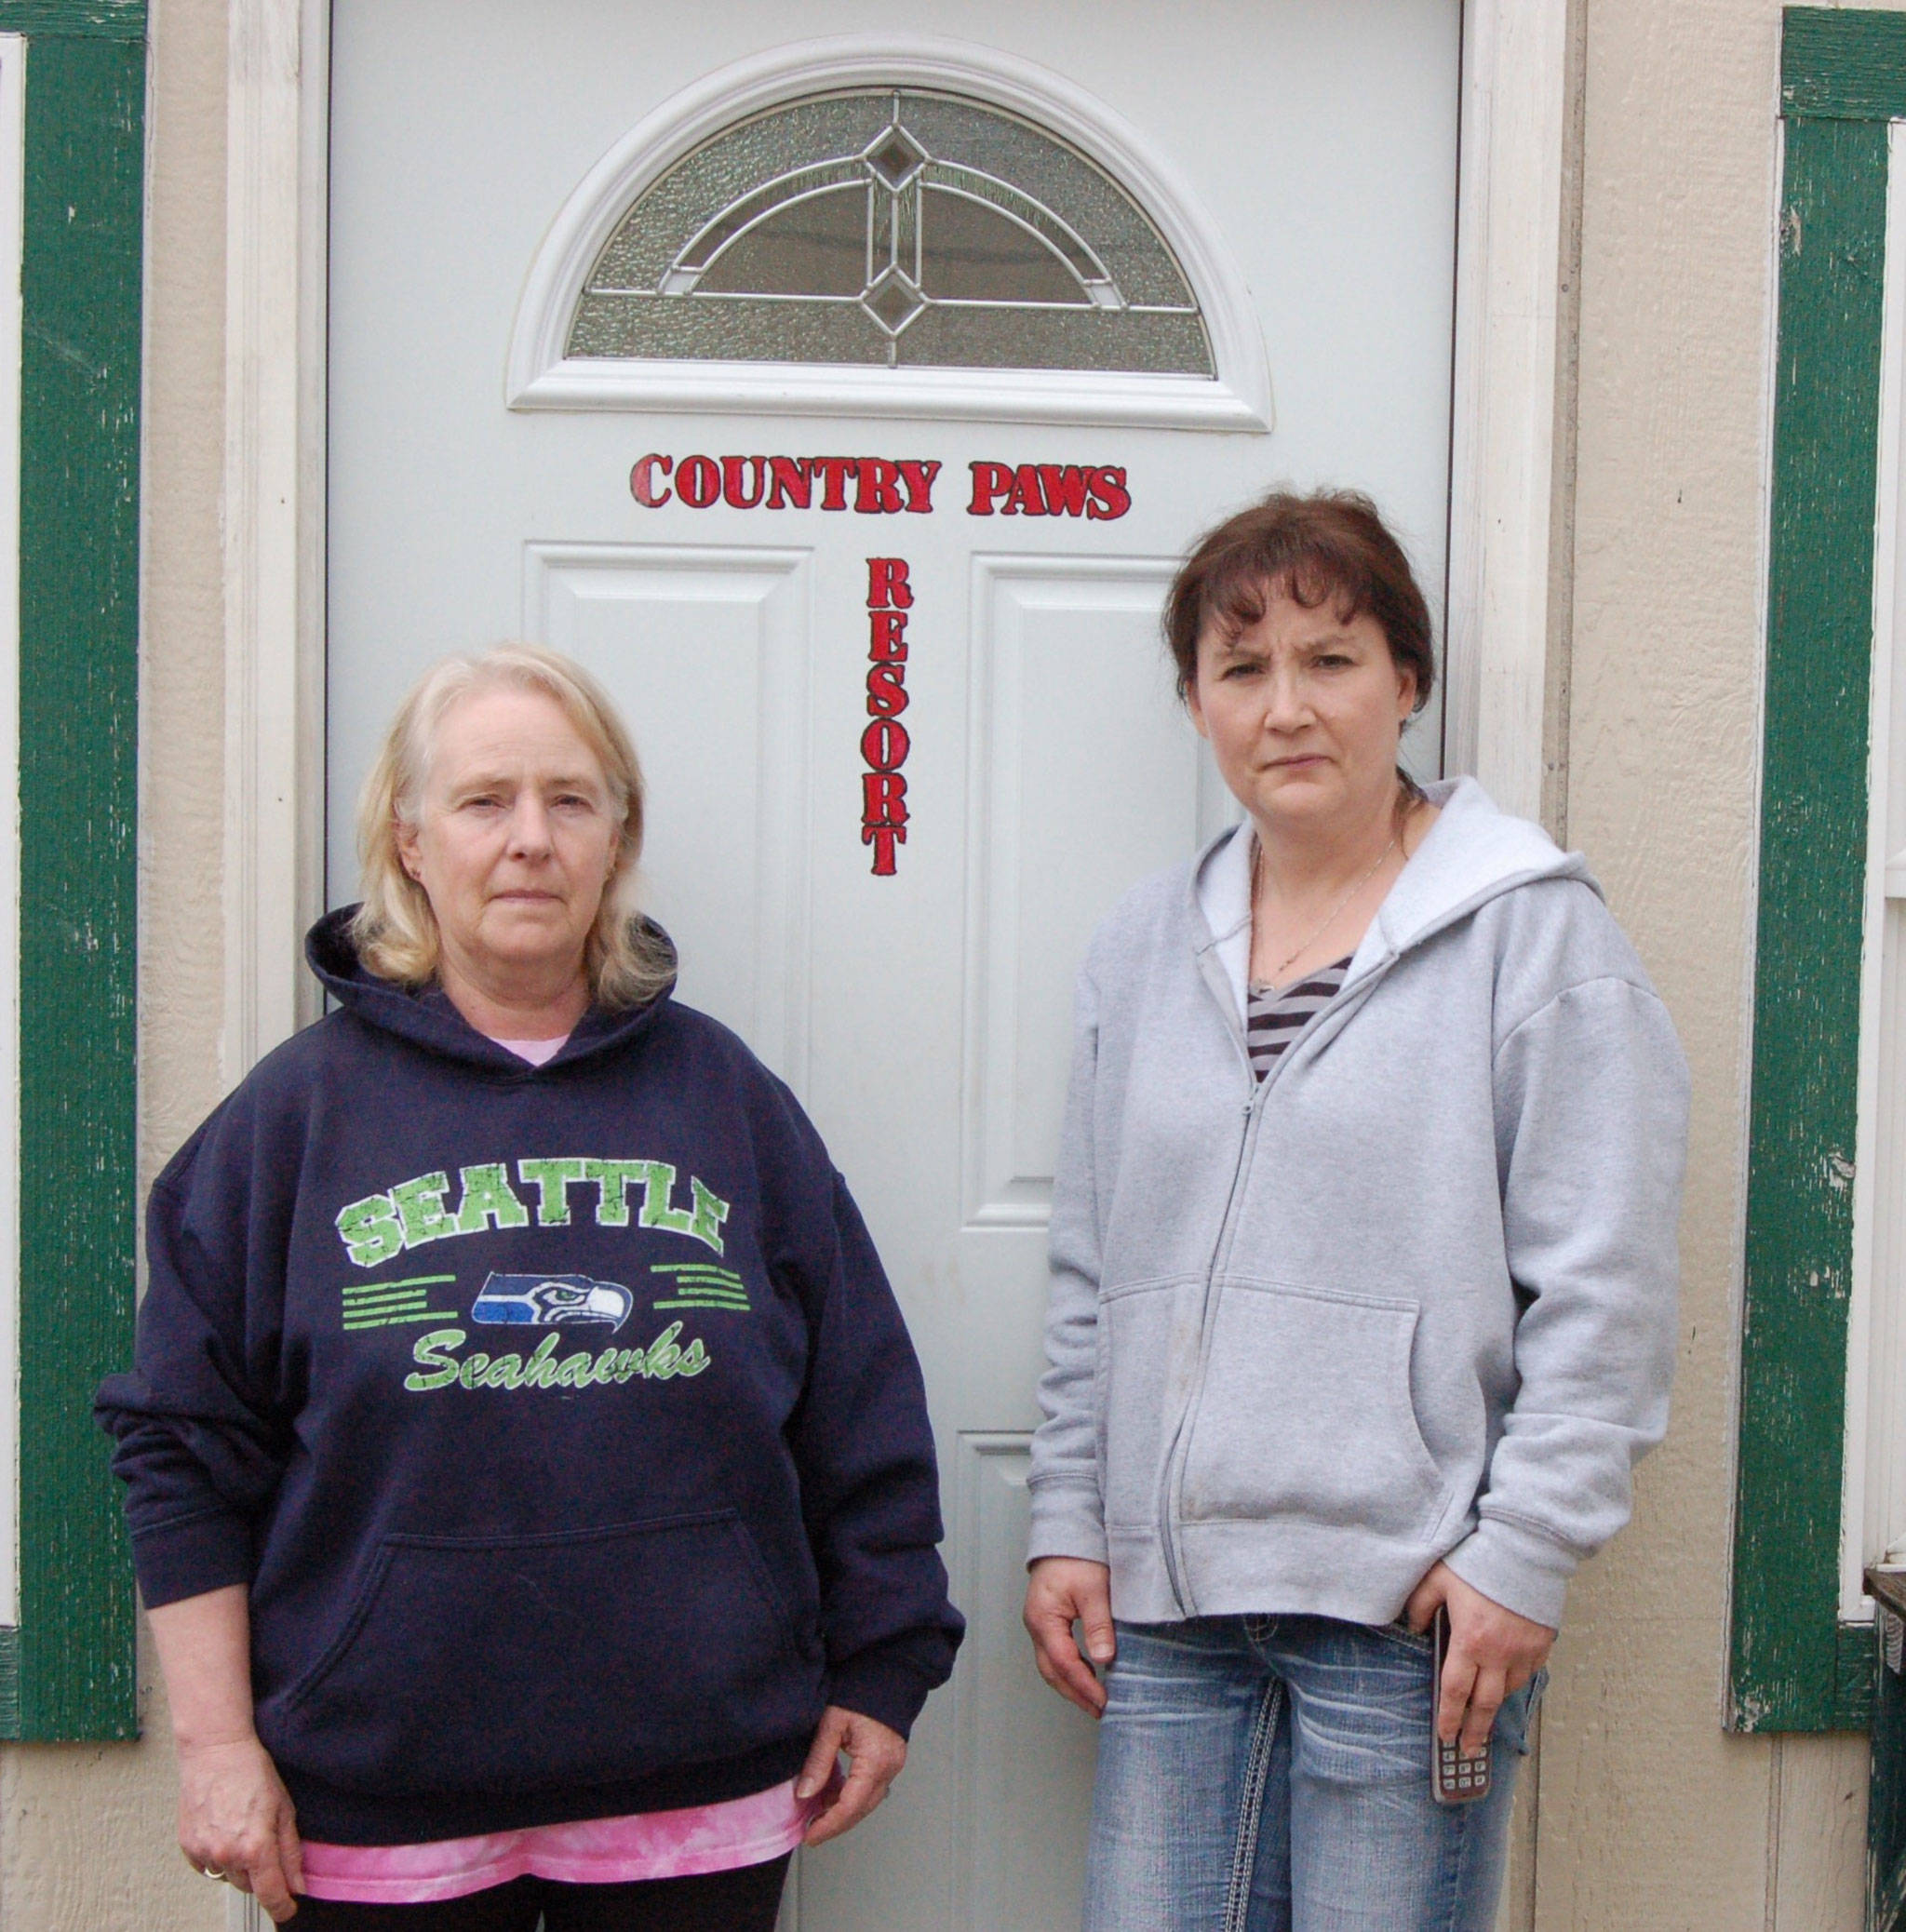 Country Paws Resort owner Shelley Denton, left, stands with employee Noelle Geyer, right, in front of their office building after discussing how the company was scammed from a private advertising company claiming to be through the Sequim-Dungeness Valley Chamber of Commerce. Sequim Gazette photo by Erin Hawkins